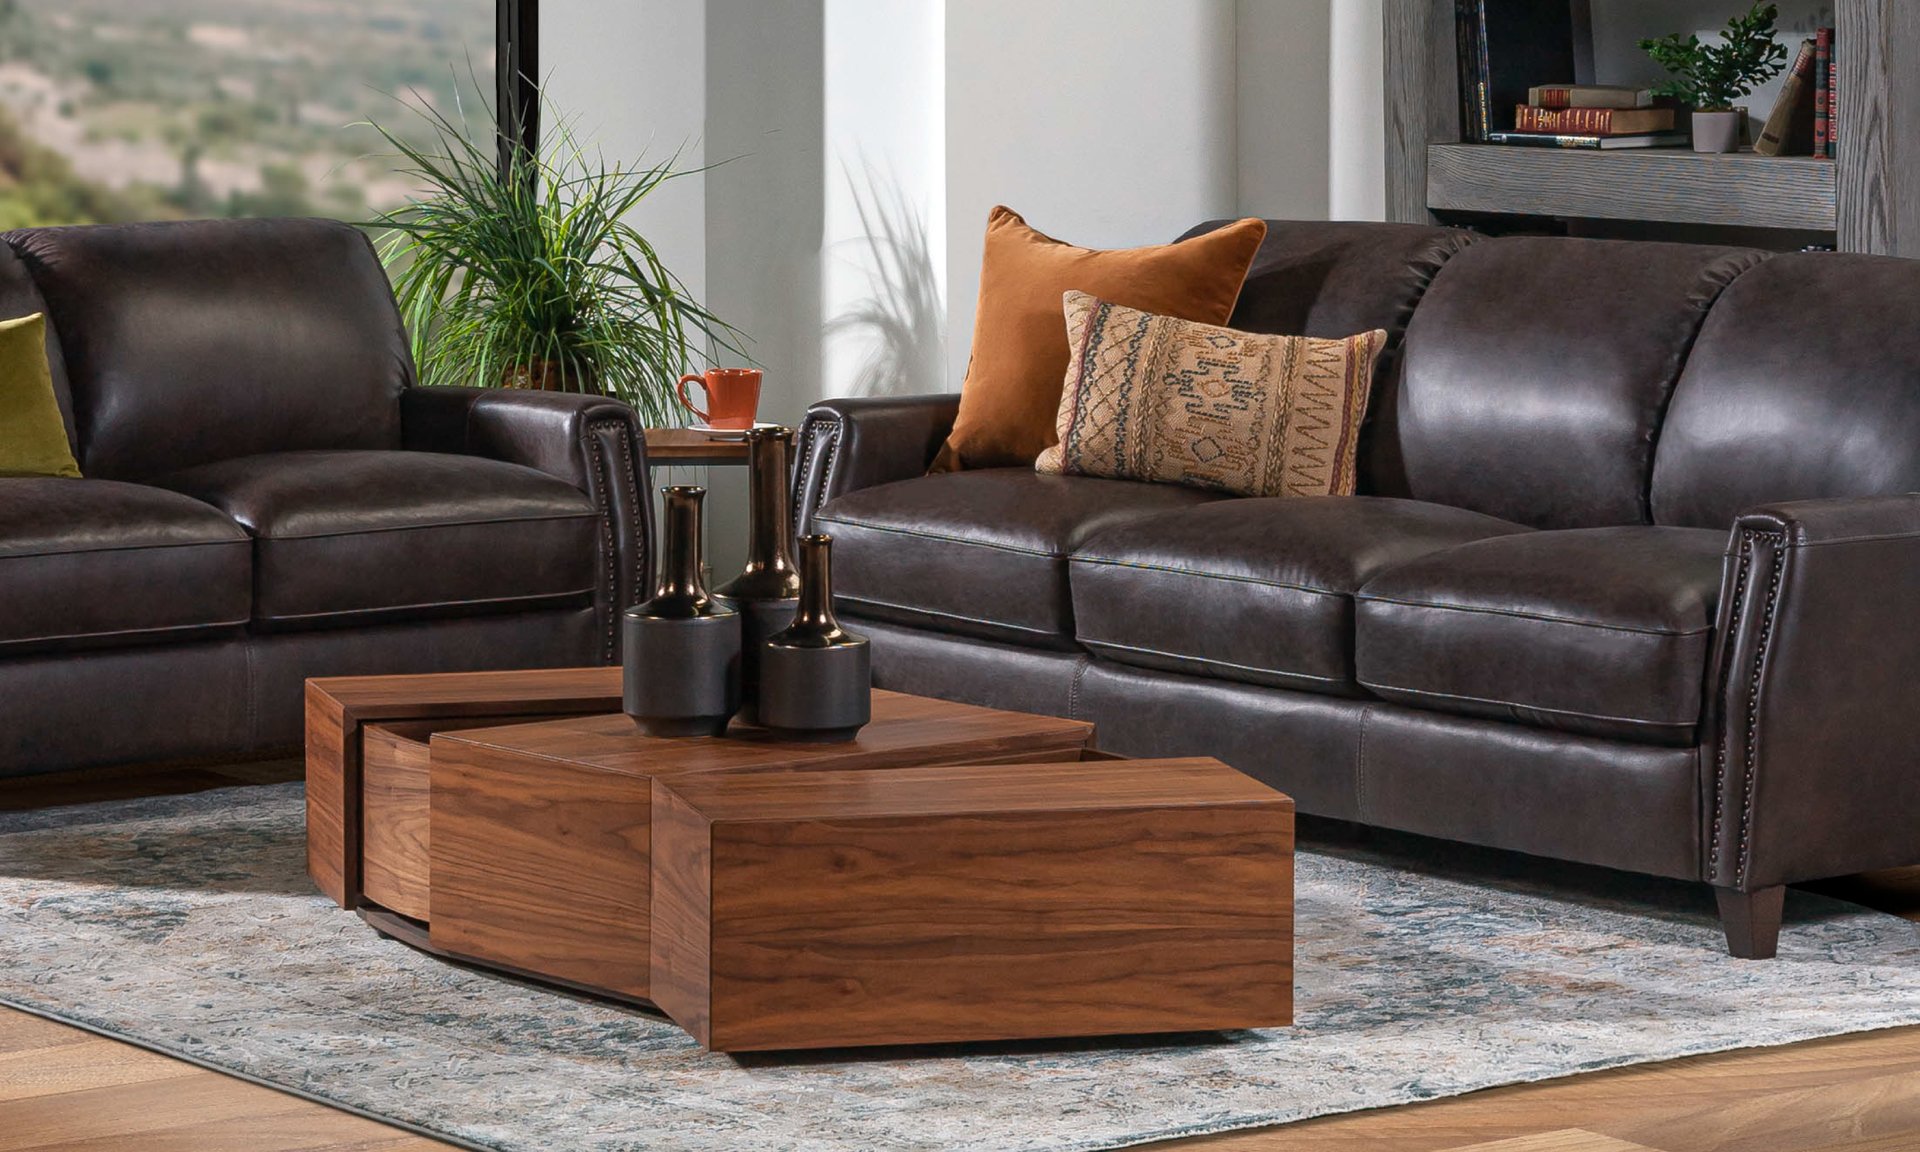 Find the table you need for your living room including end tables, coffee tables and sofa tables.